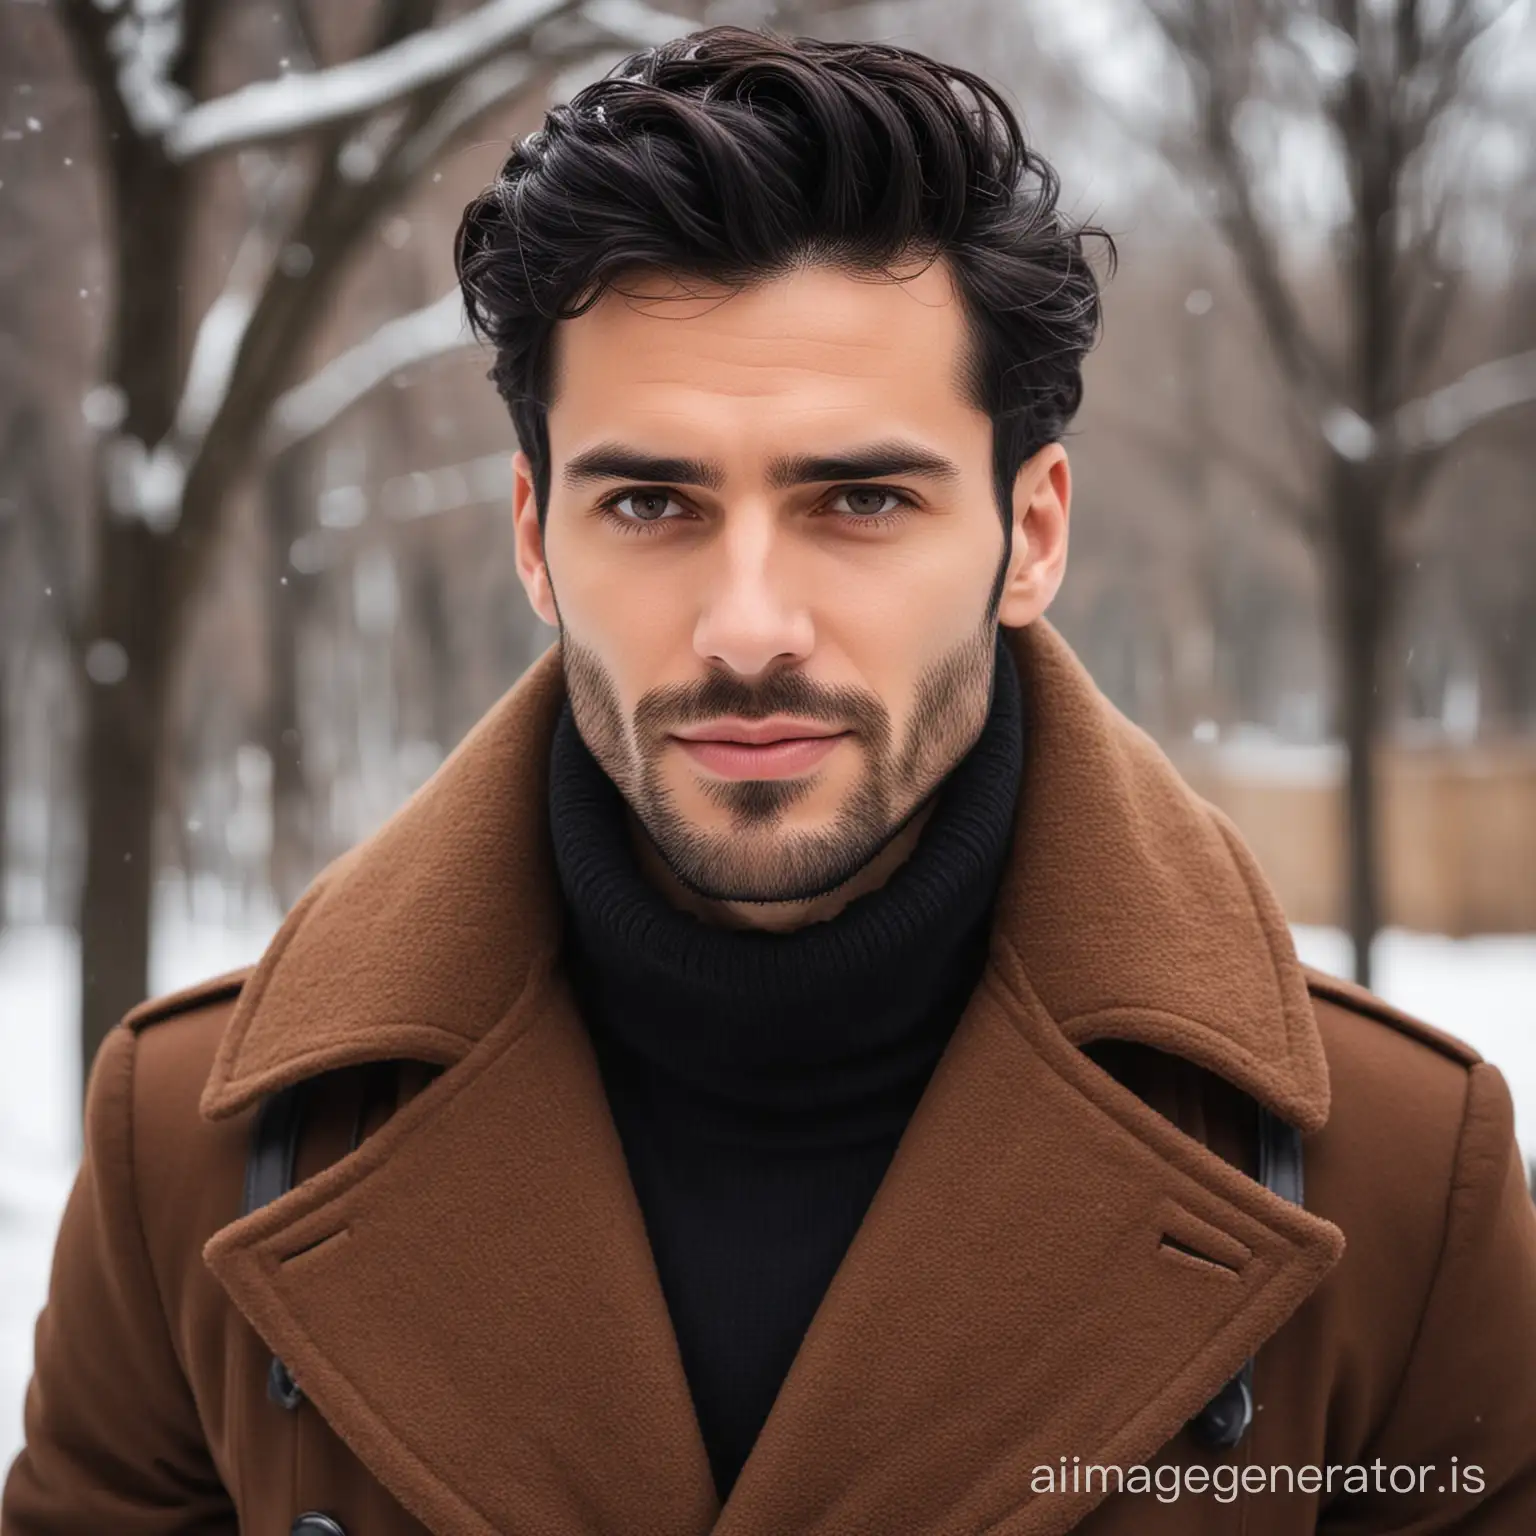 Elegant-Winter-Fashion-Stylish-Man-with-Black-Gentleman-Hair-and-Brown-Accents